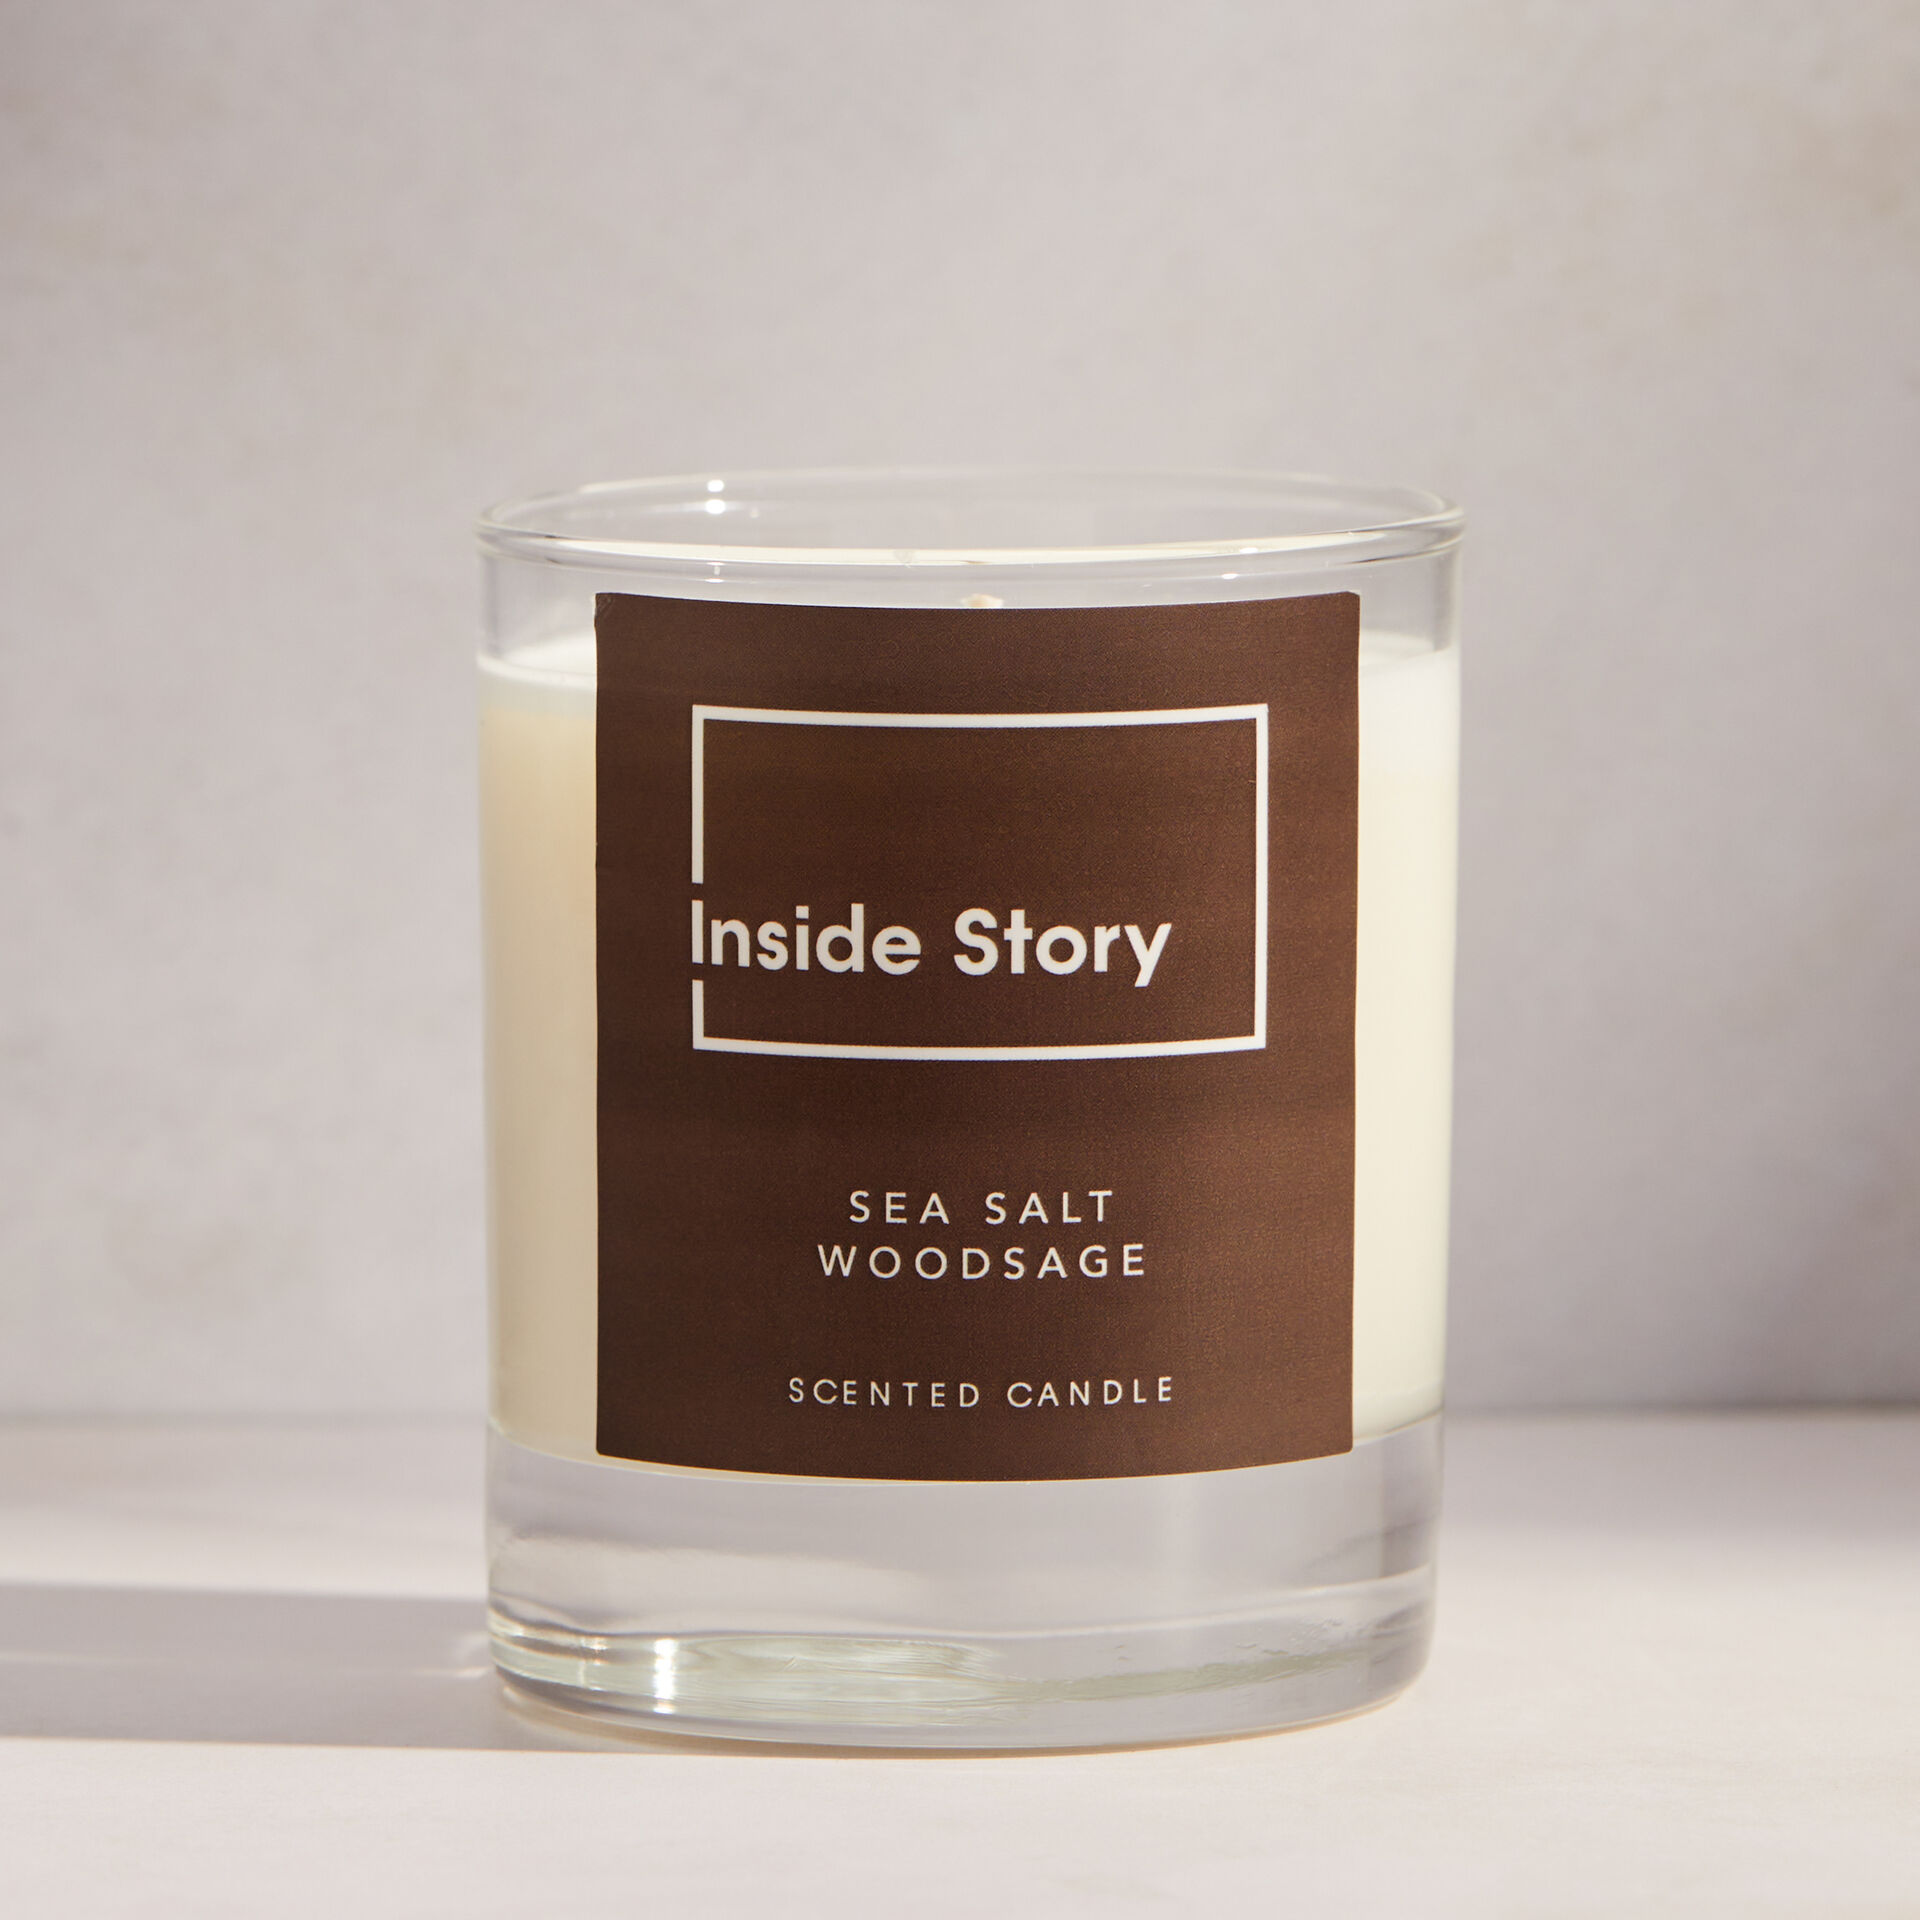 ${product-id}-Sea Salt And Wood Sage Filled Candle-Sea Salt And Wood Sage-${view-type}